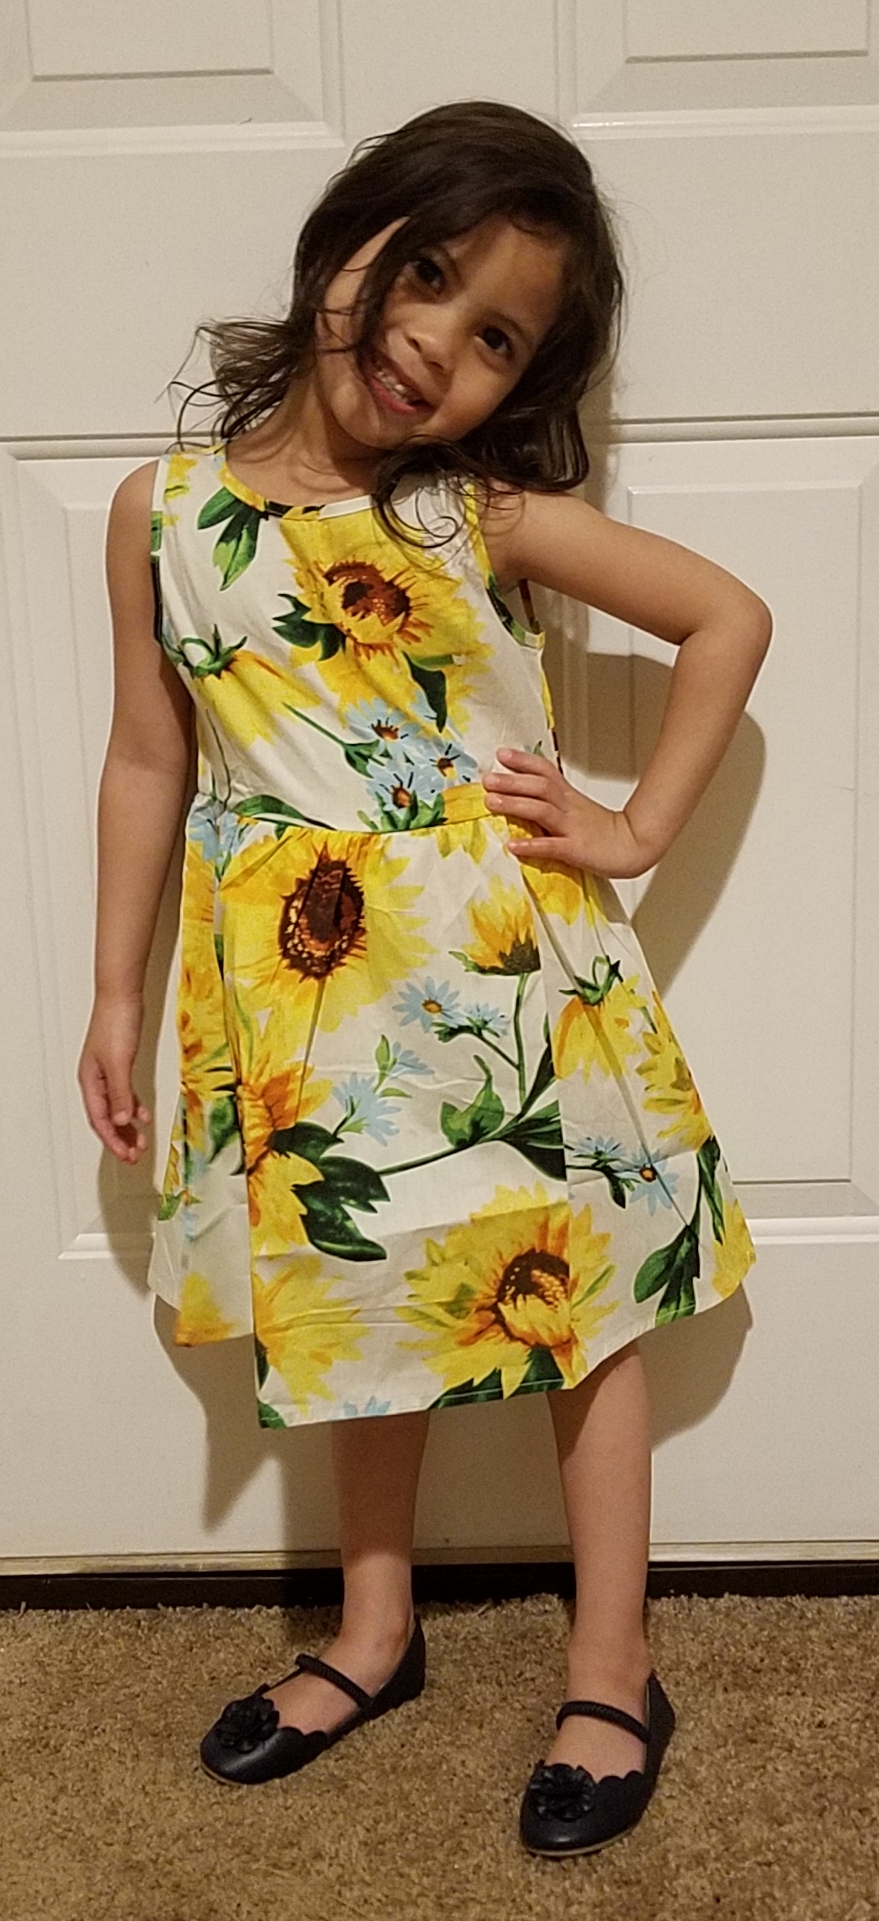 Perfect little dress for spring and summer time!